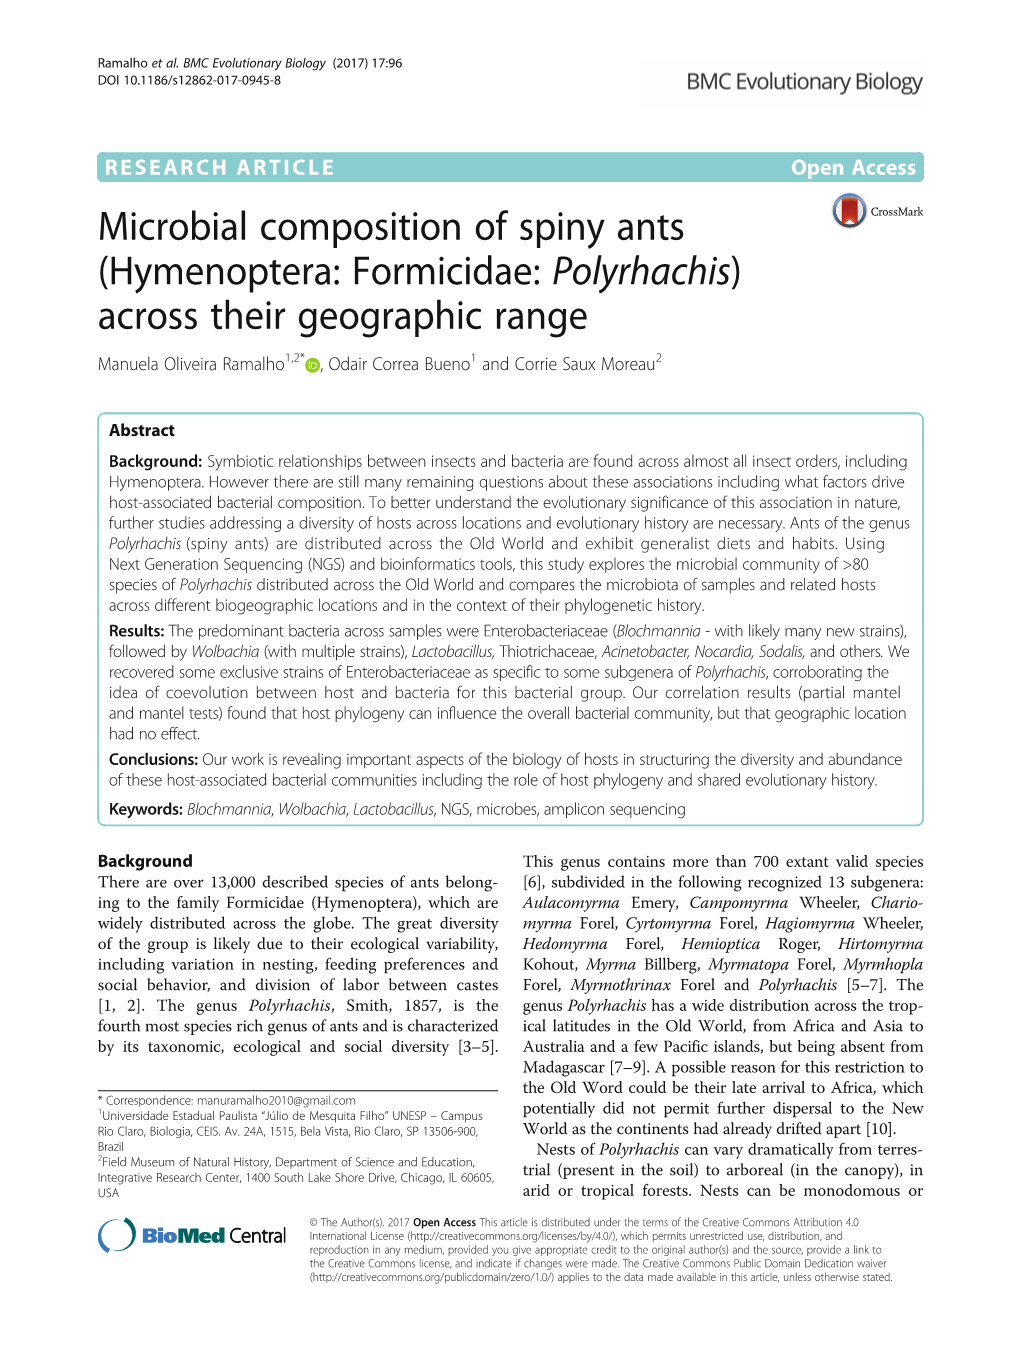 Microbial Composition of Spiny Ants